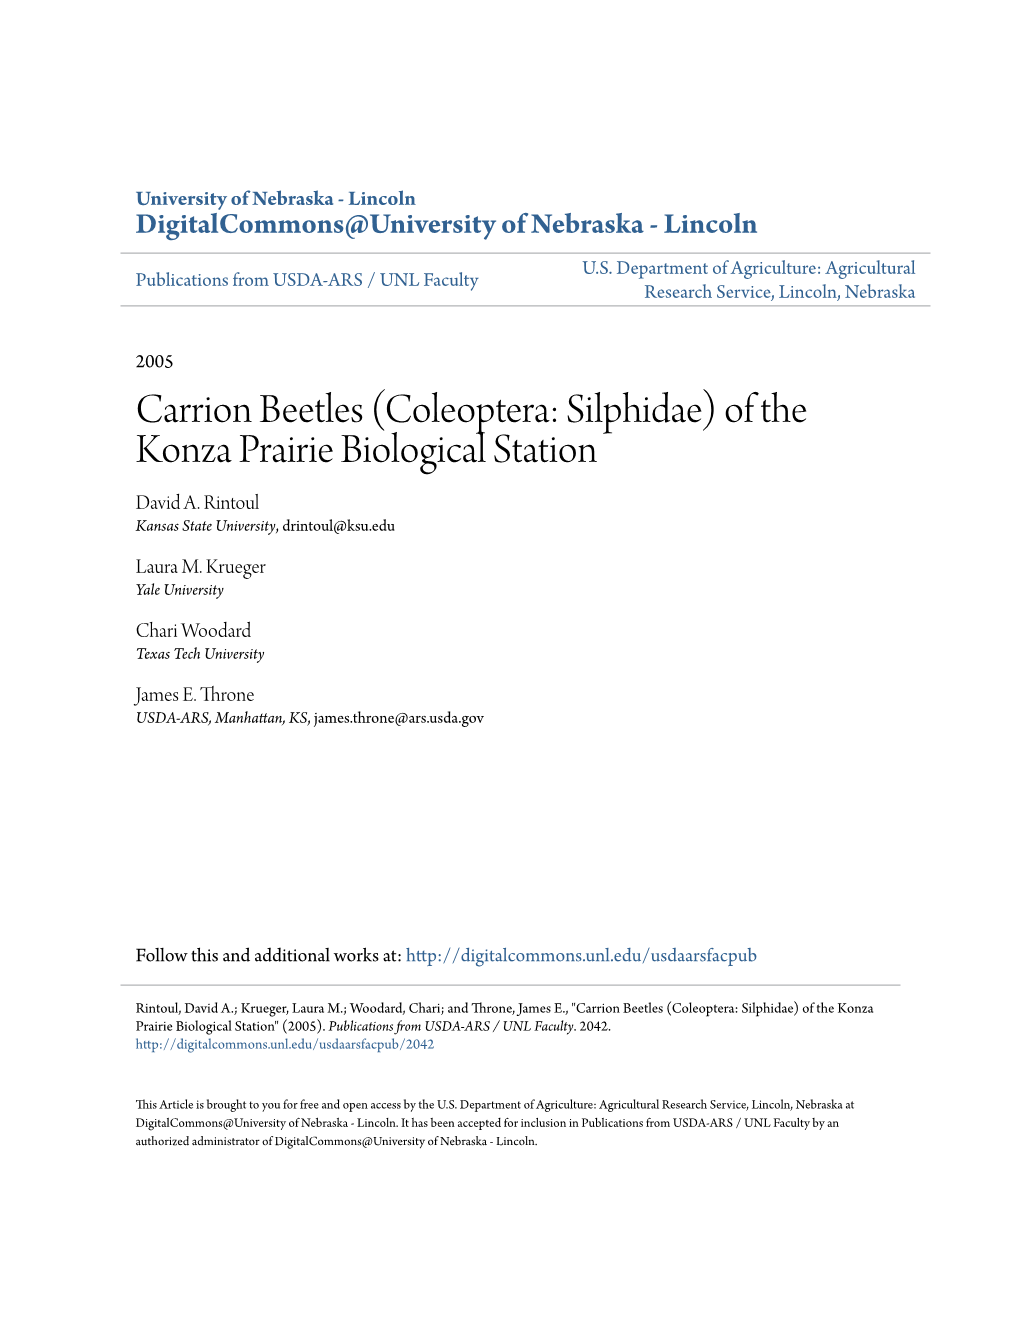 Carrion Beetles (Coleoptera: Silphidae) of the Konza Prairie Biological Station David A